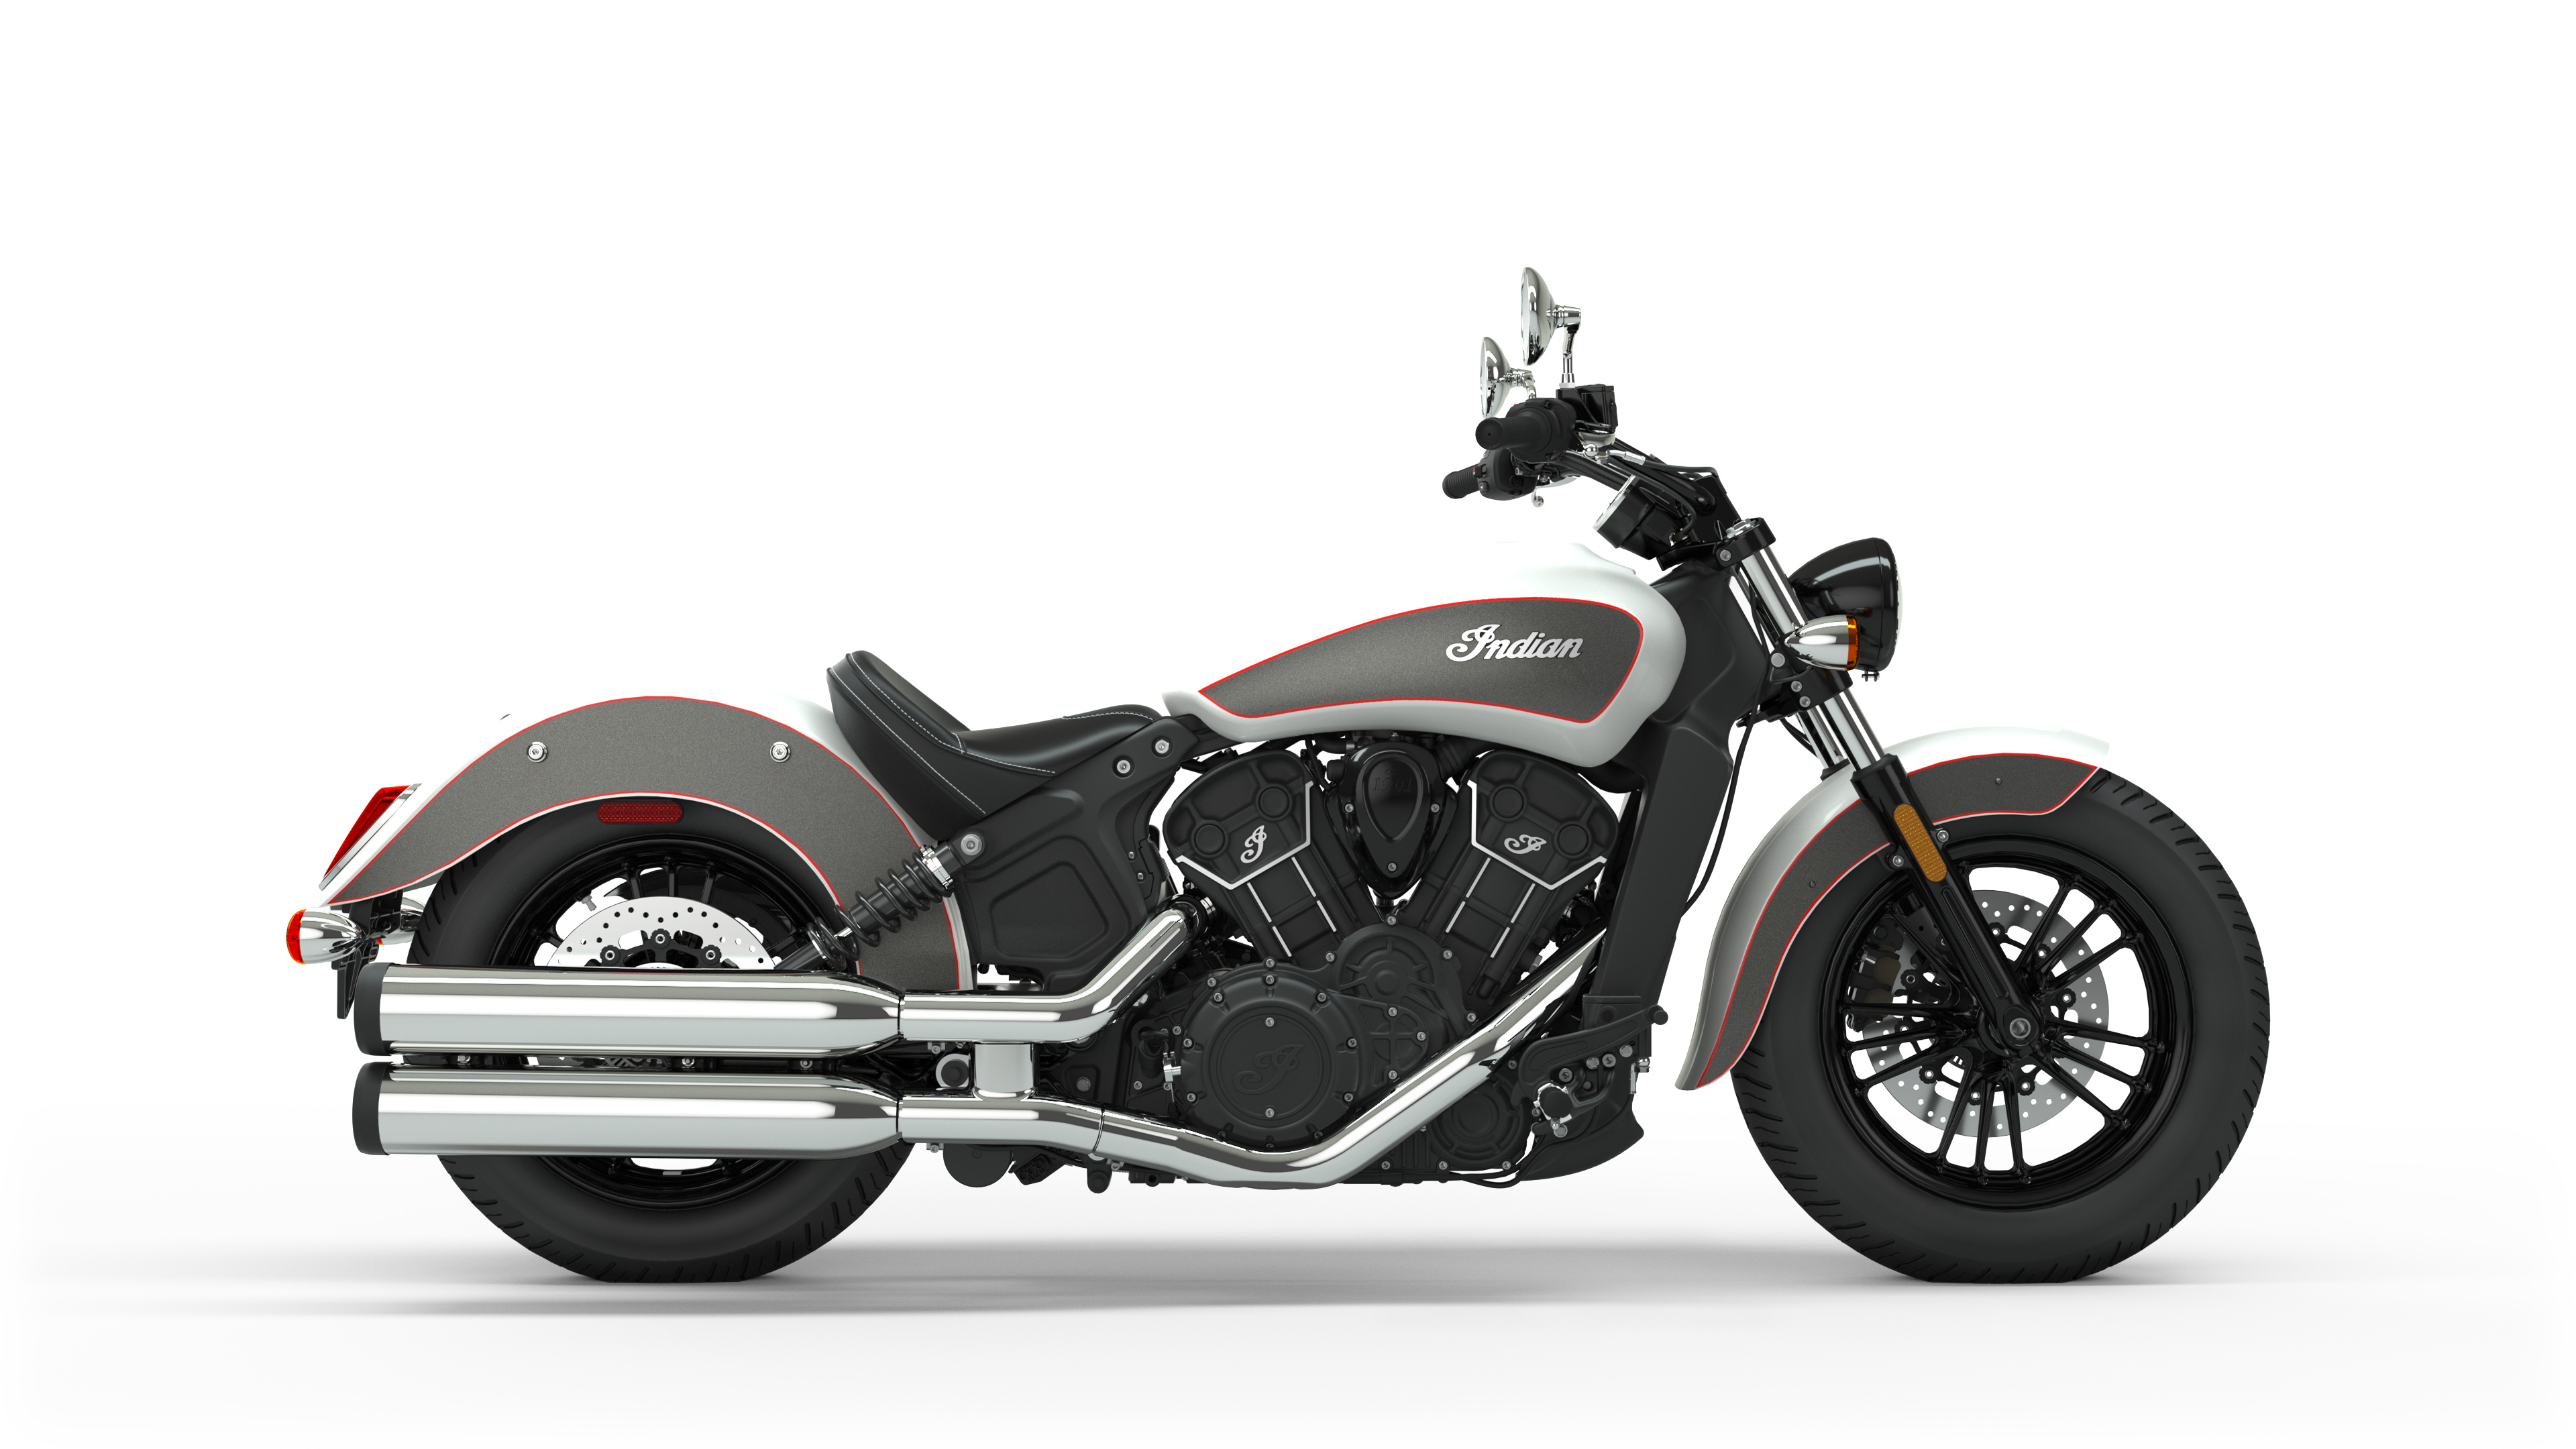 Indian Scout Sixty, Auto industry, 2020 model, Cycle World, 3840x2160 4K Desktop